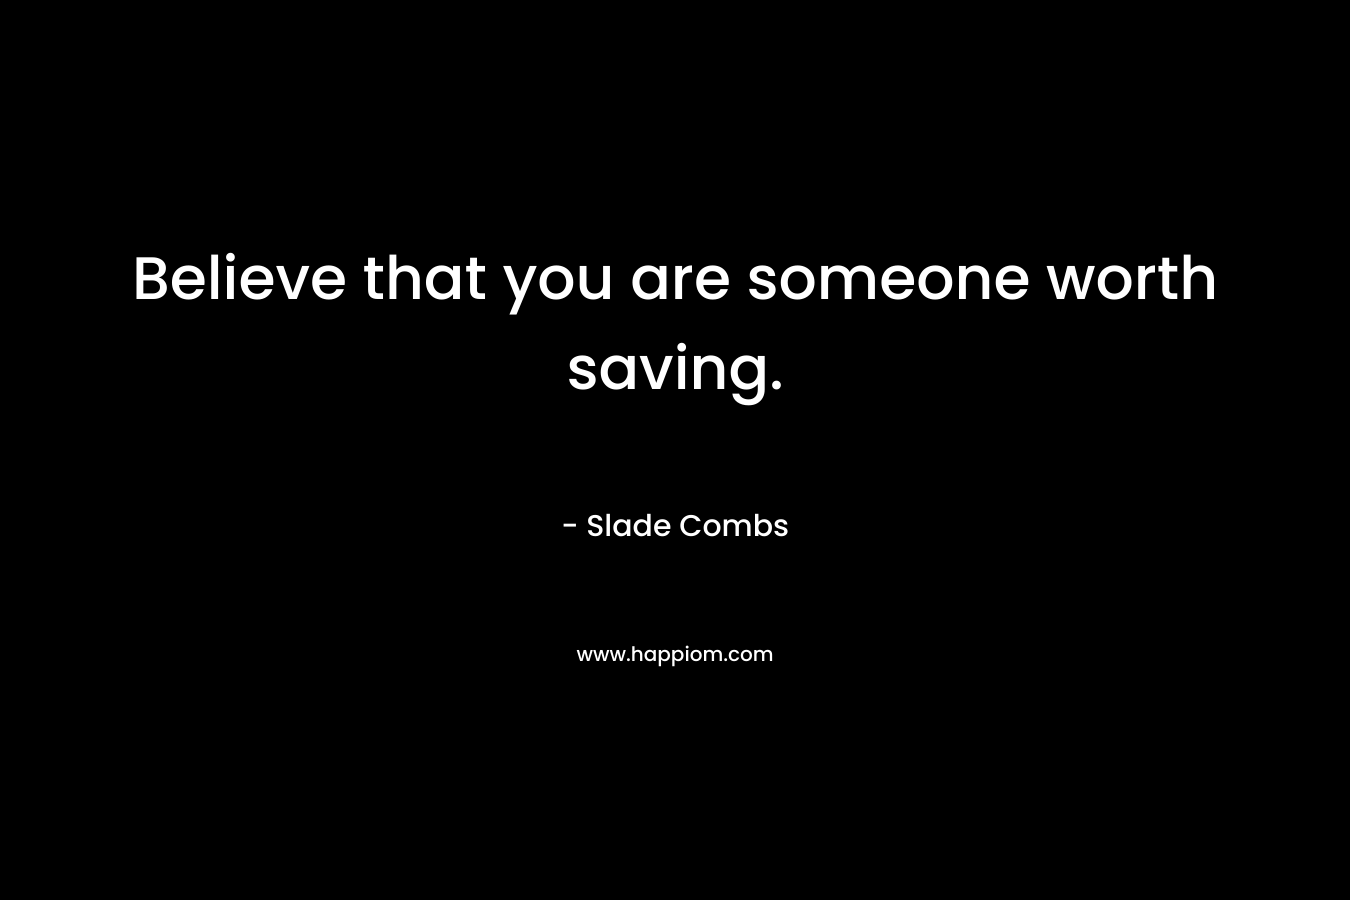 Believe that you are someone worth saving.